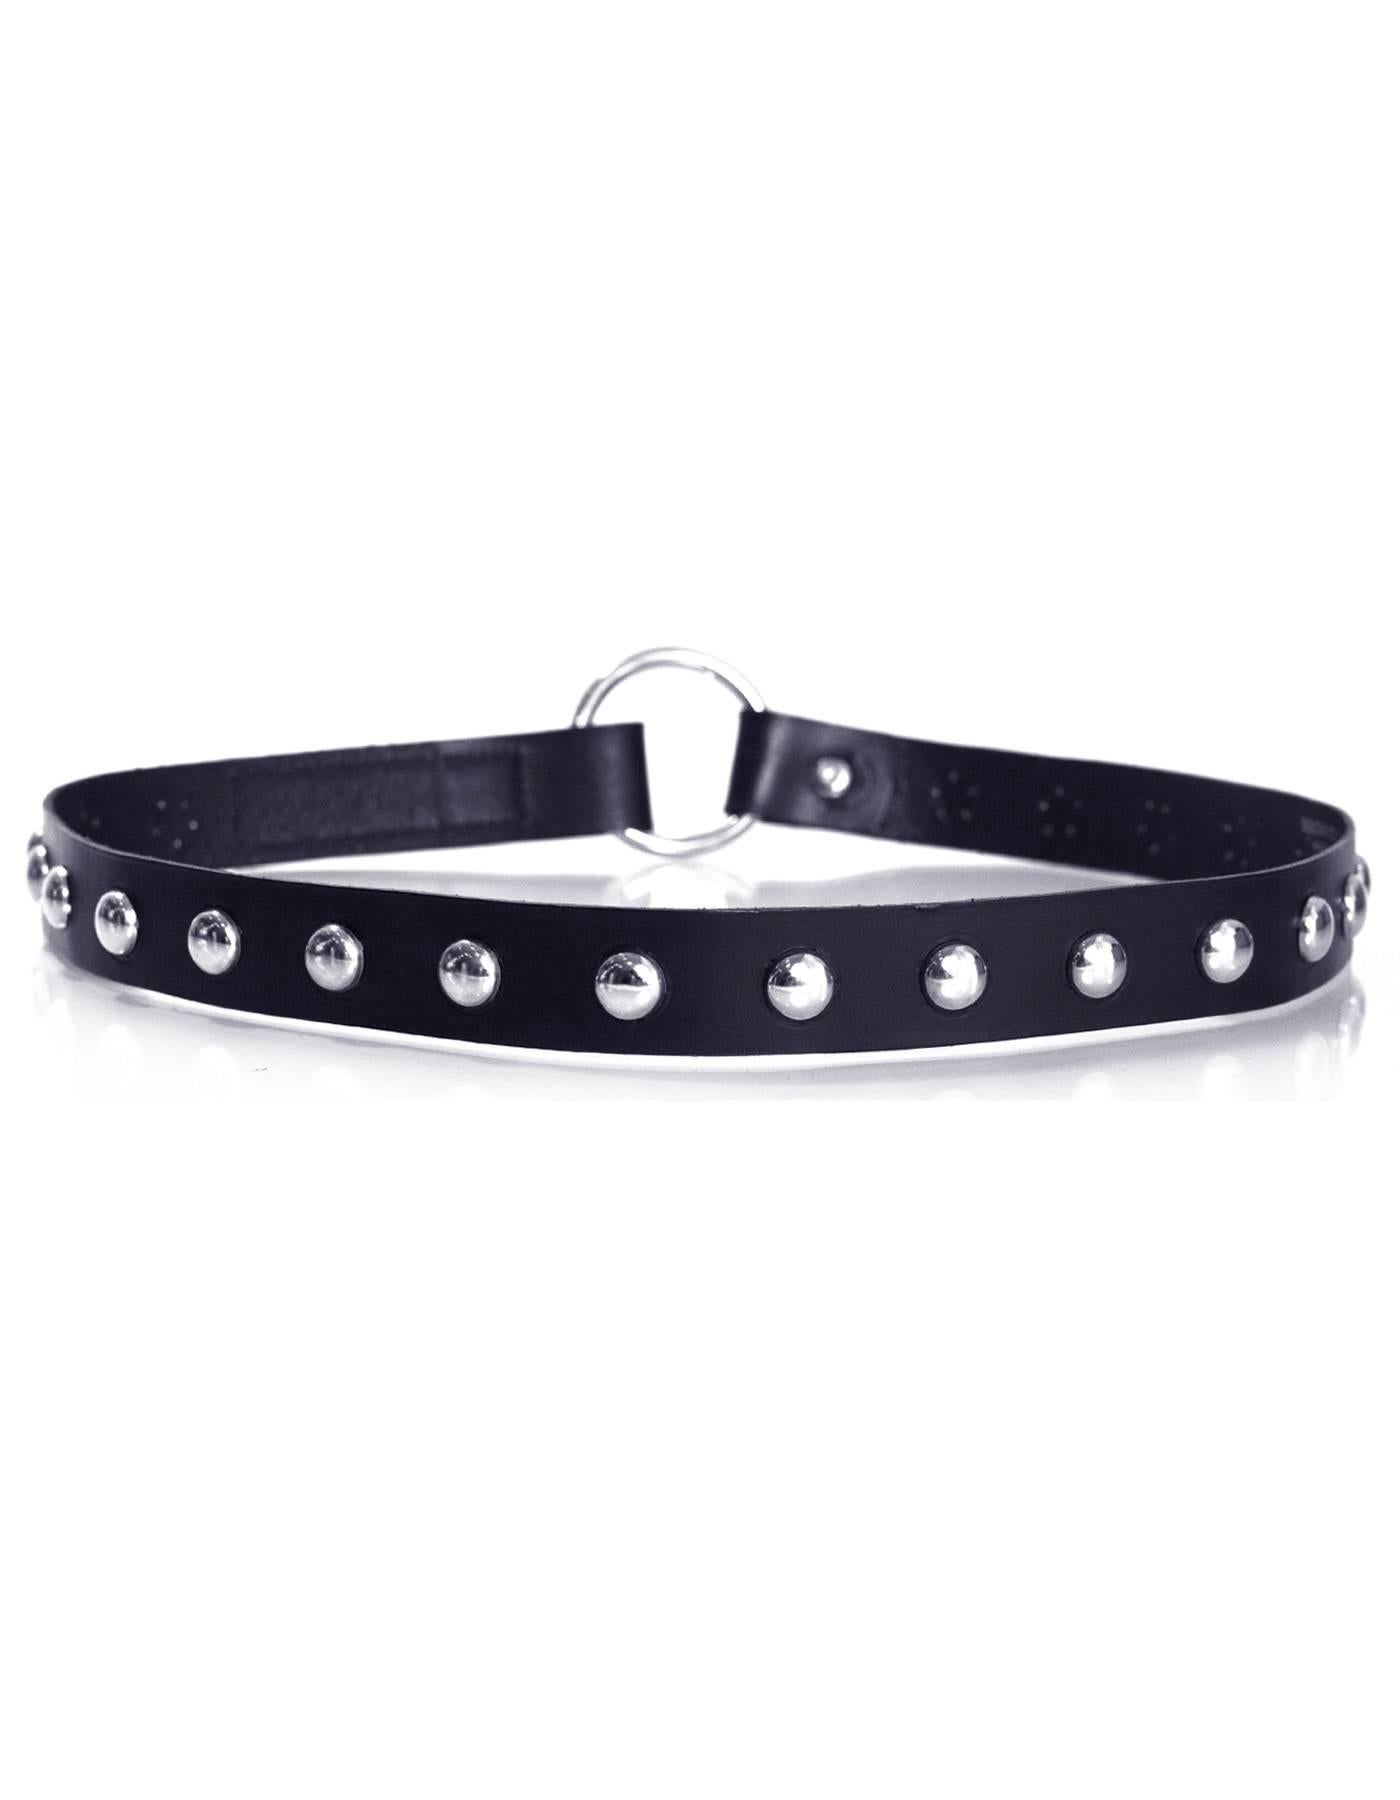 Dolce & Gabbana Black Leather Studded Belt 

Made In: Italy
Color: Black and silvertone
Materials: Leather and metal
Closure/Opening: Velcro loop
Stamp: 46/085
Overall Condition: Excellent pre-owned condition with the exception of some faint